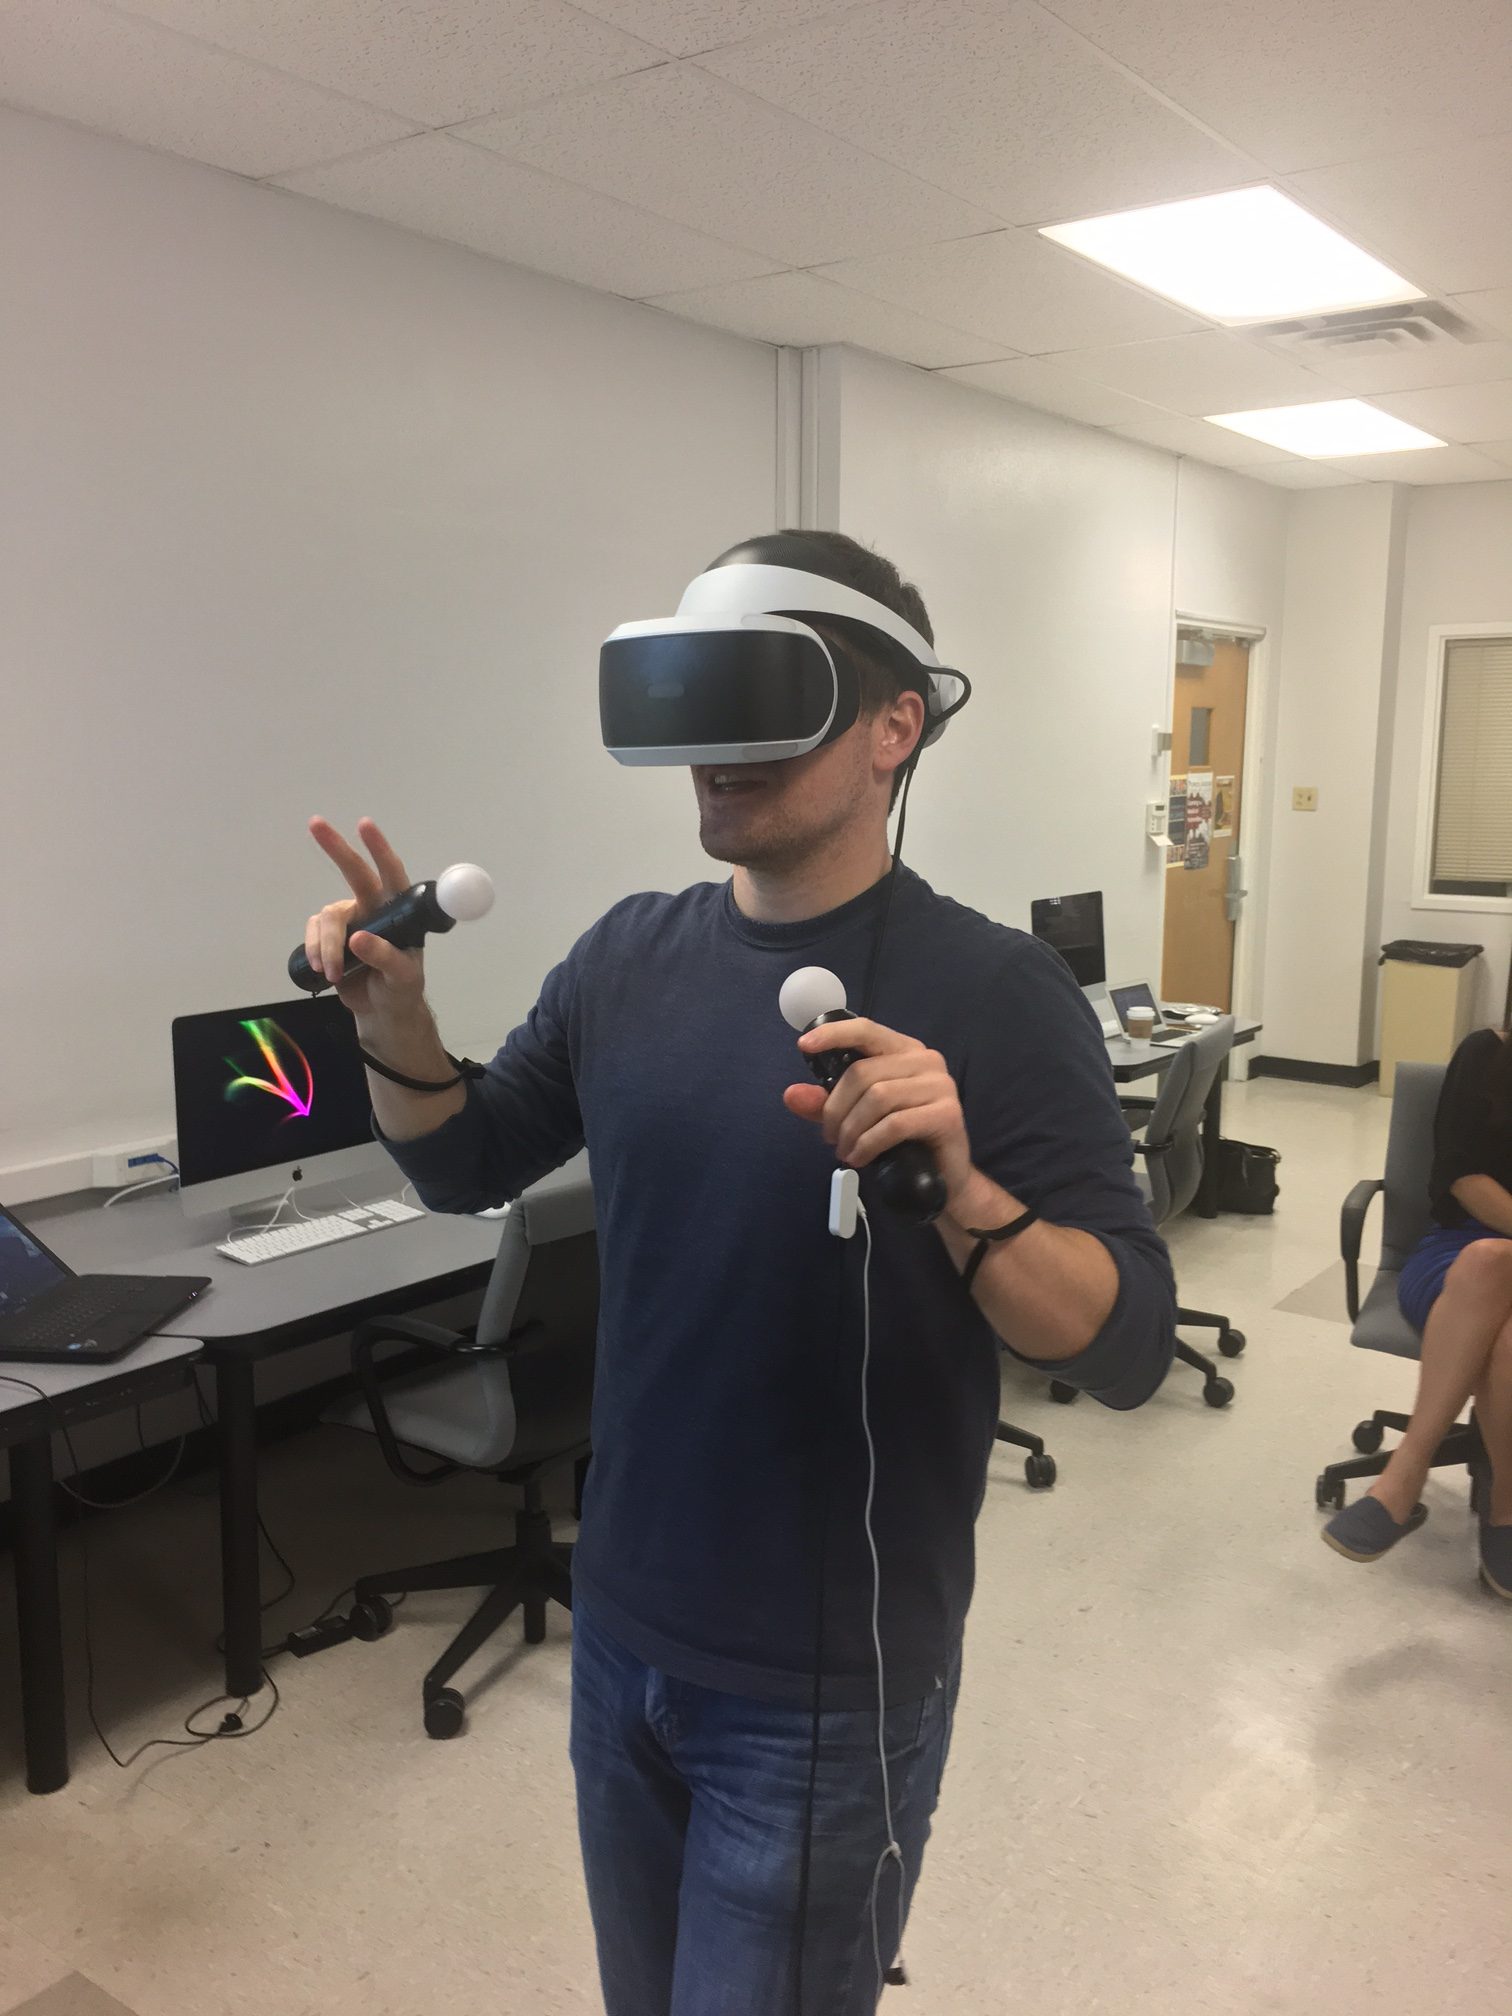 DWRL staffer Mac Scott playing the playstation with the virtual reality helmet on, and remote sensors in his hands. 